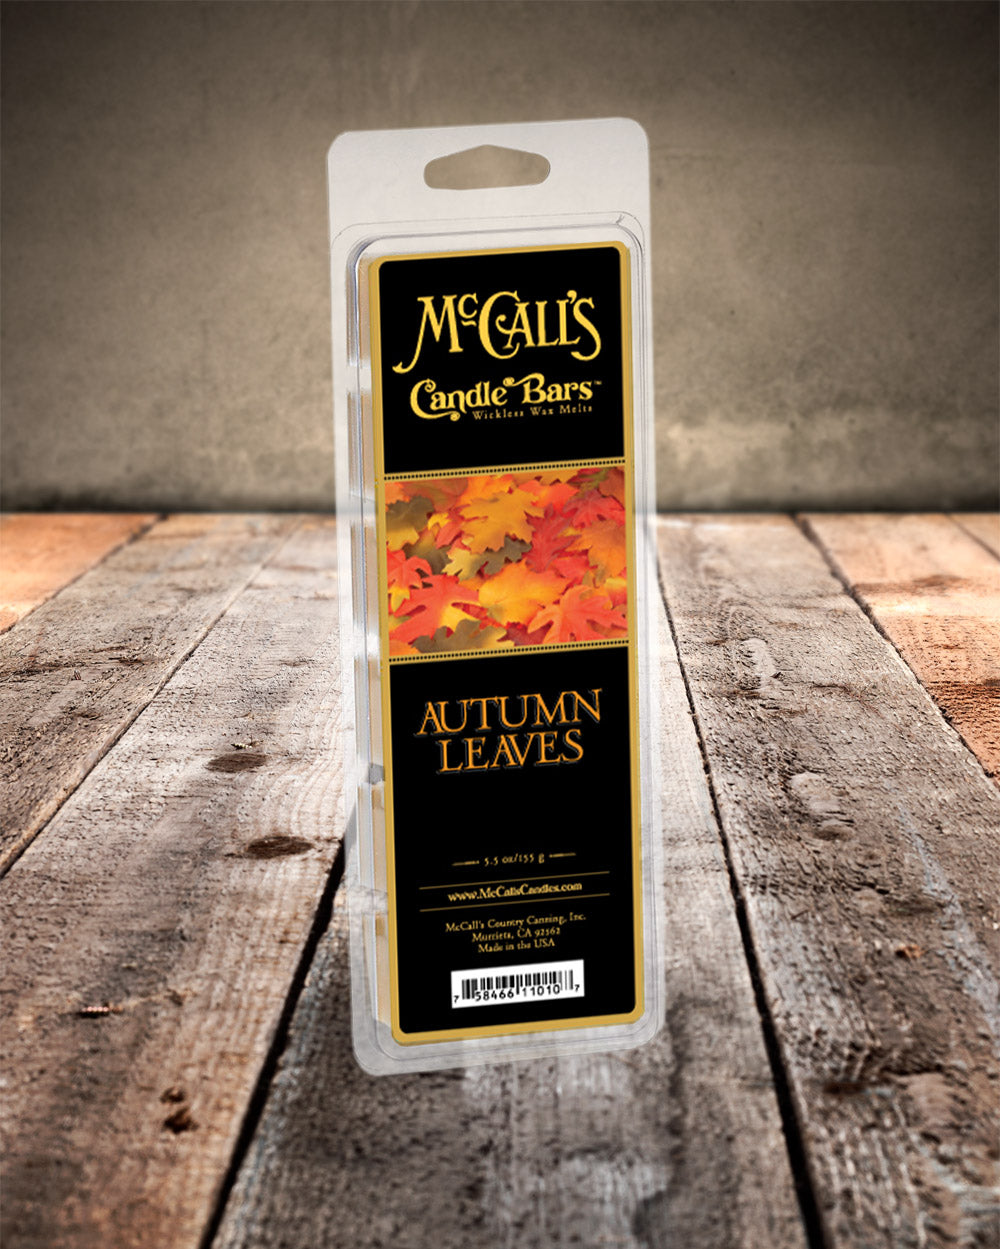 AUTUMN LEAVES Candle Bars-5.5 oz Pack